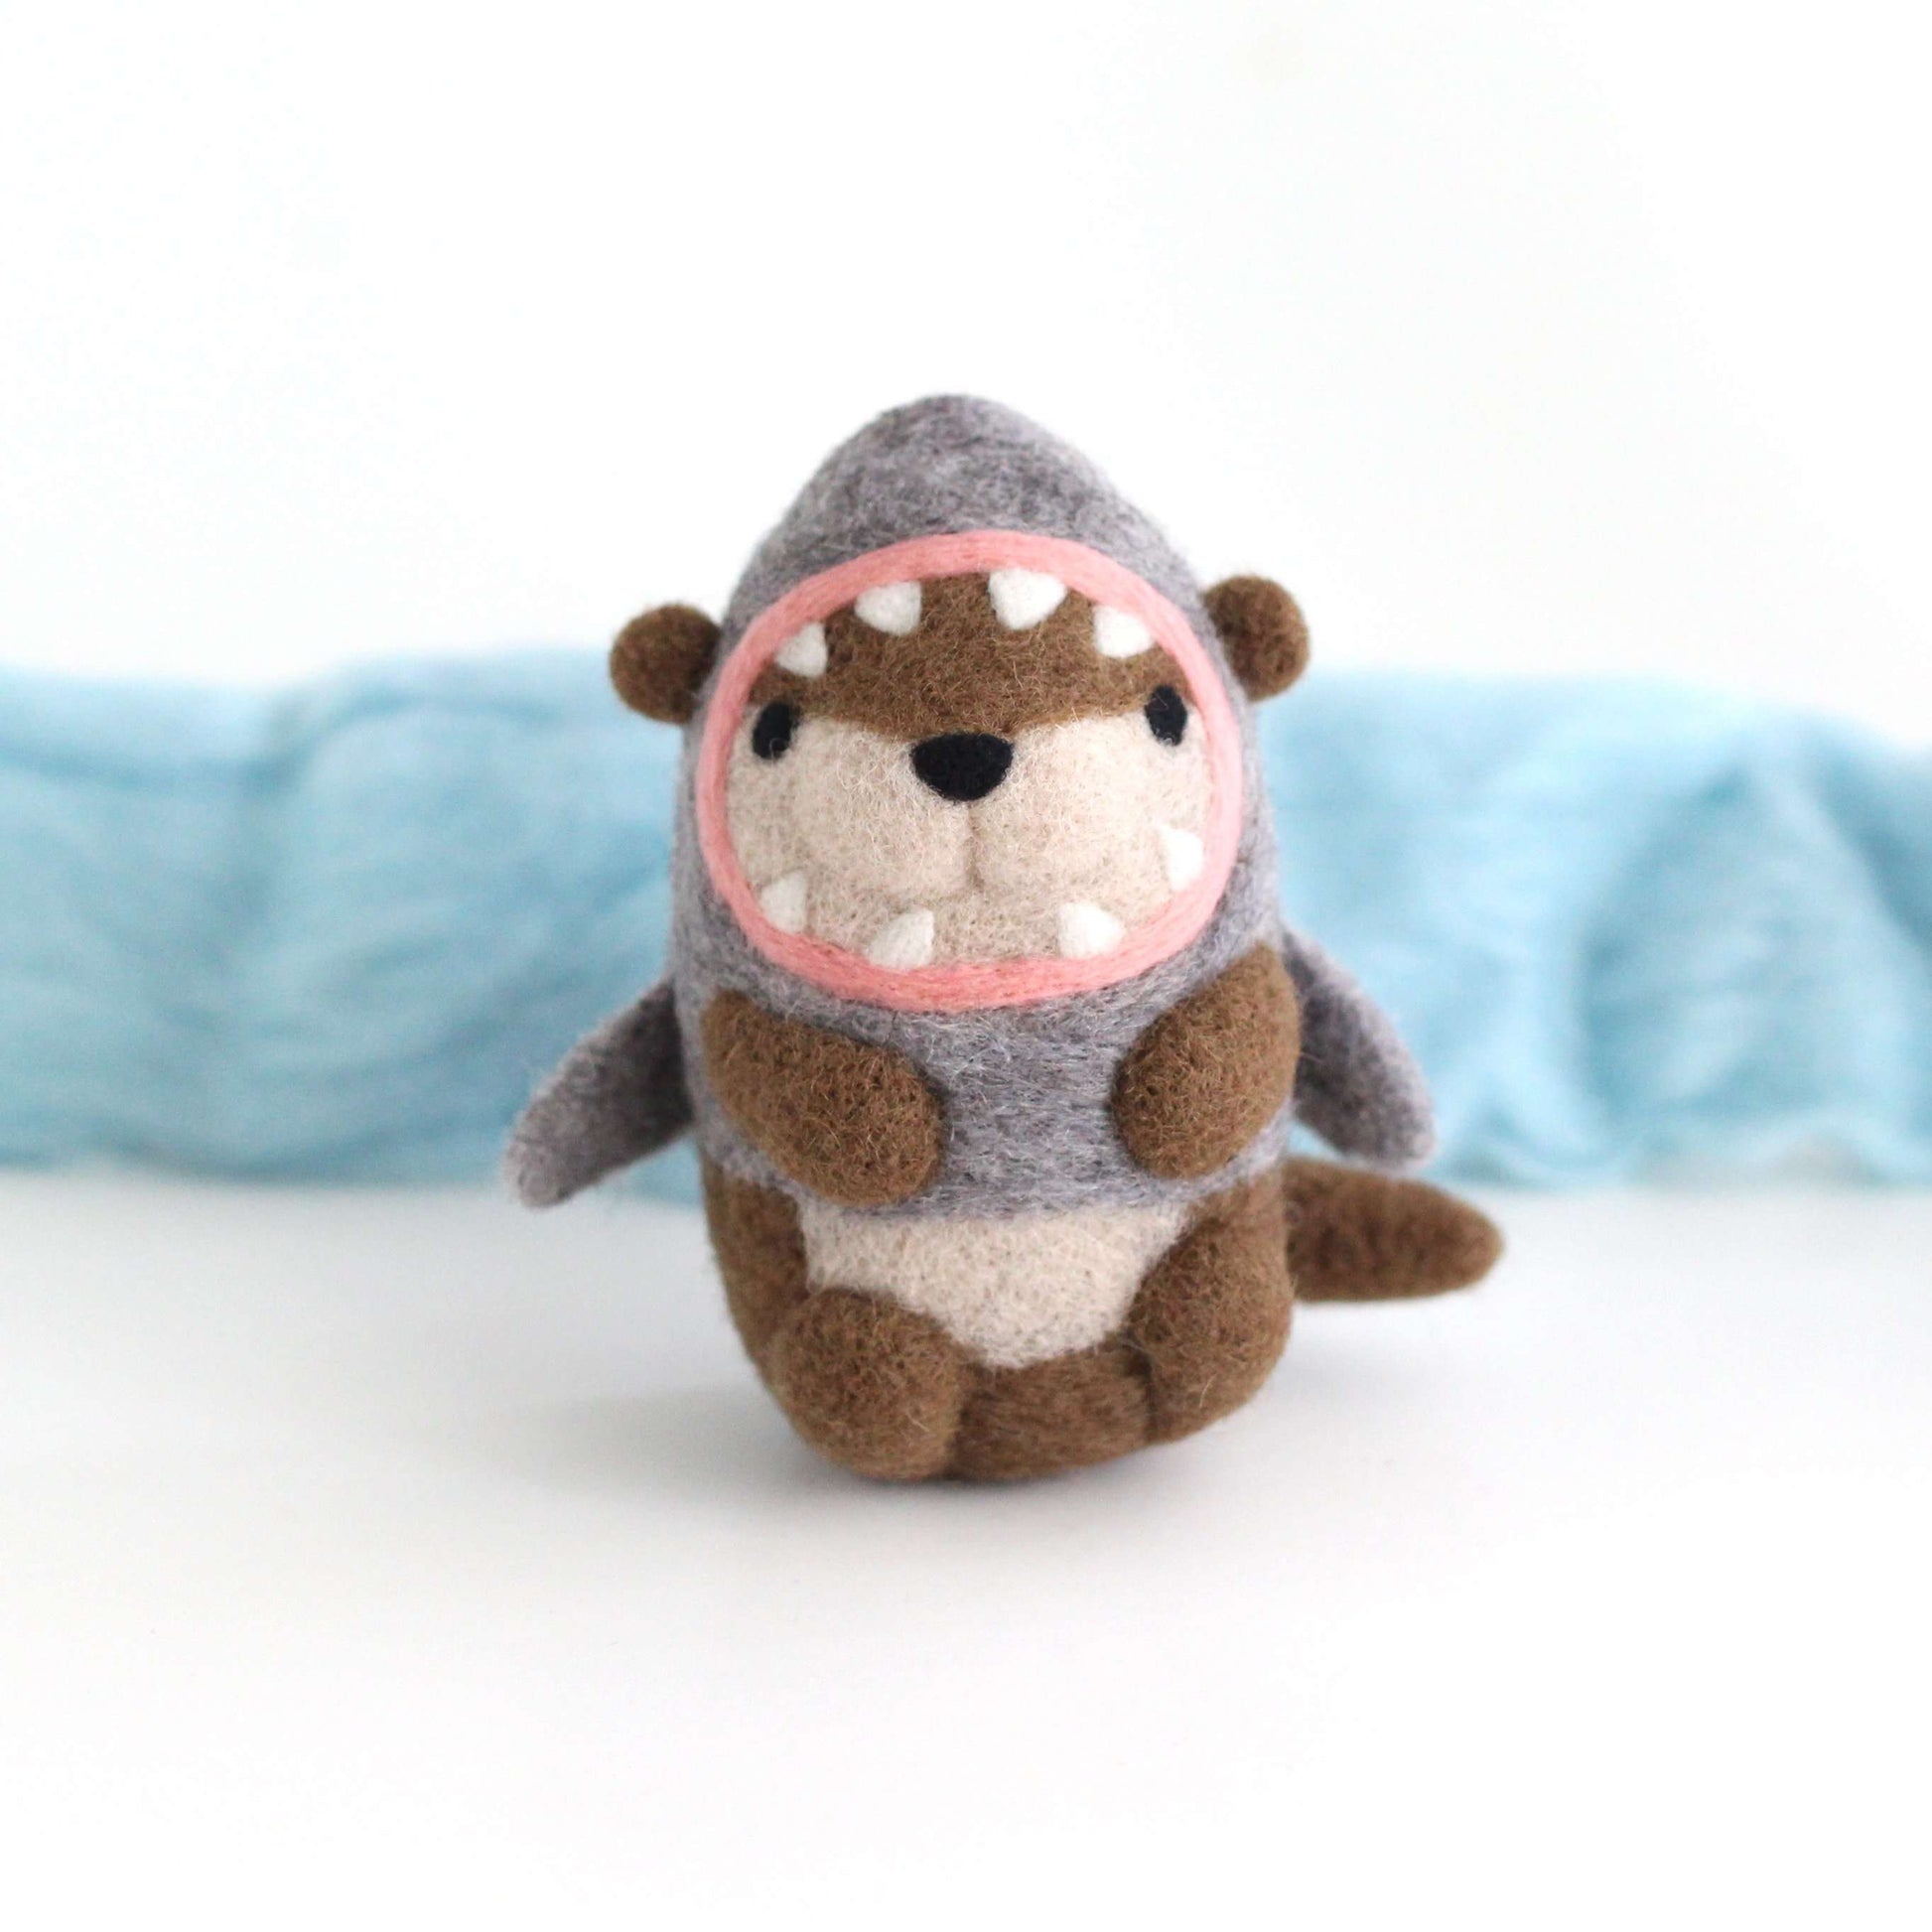 Needle Felted River Otter in a Shark Costume